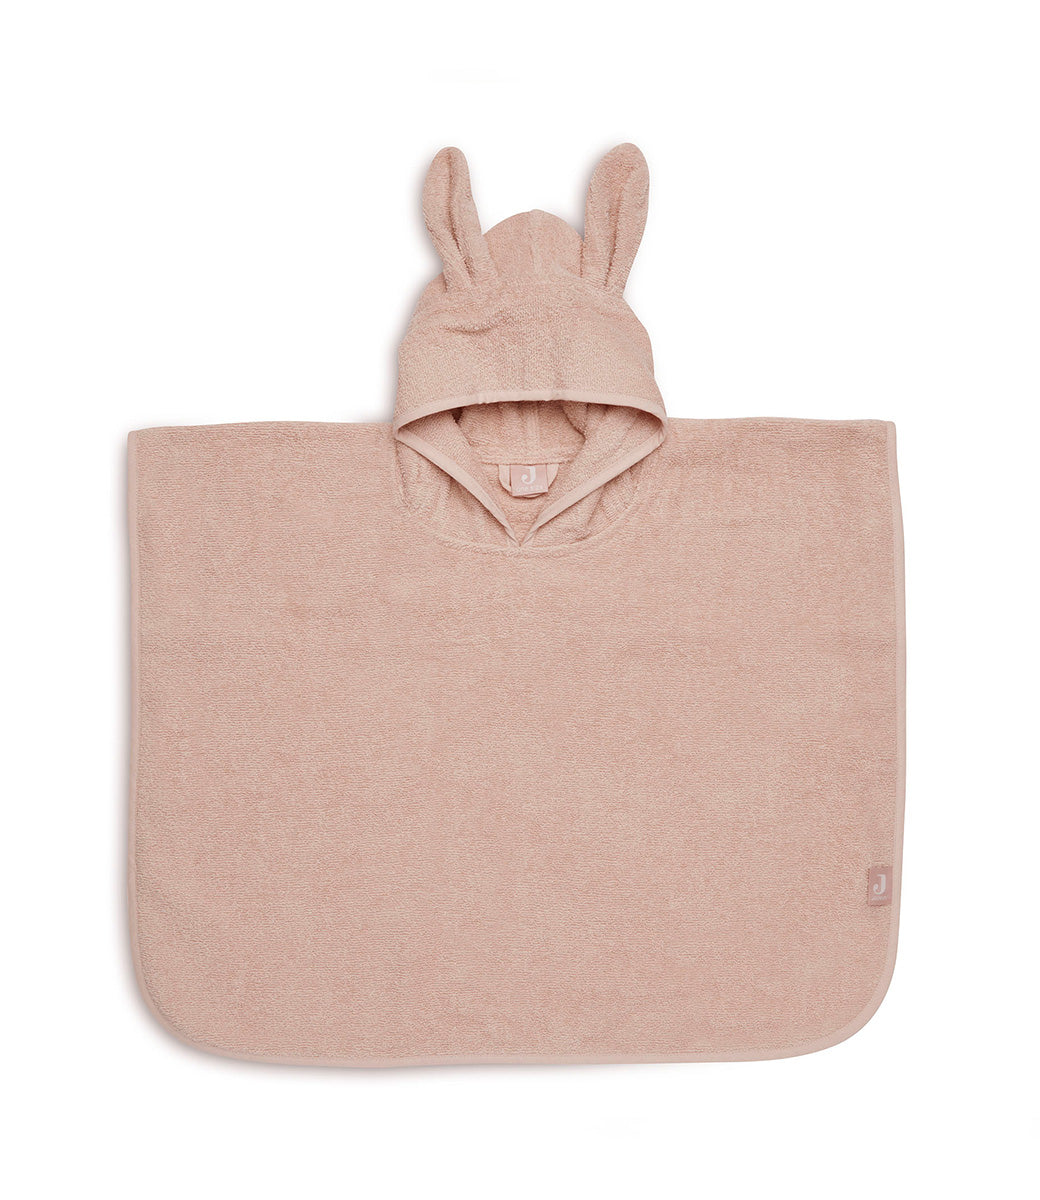 Badponcho bunny // Pale pink